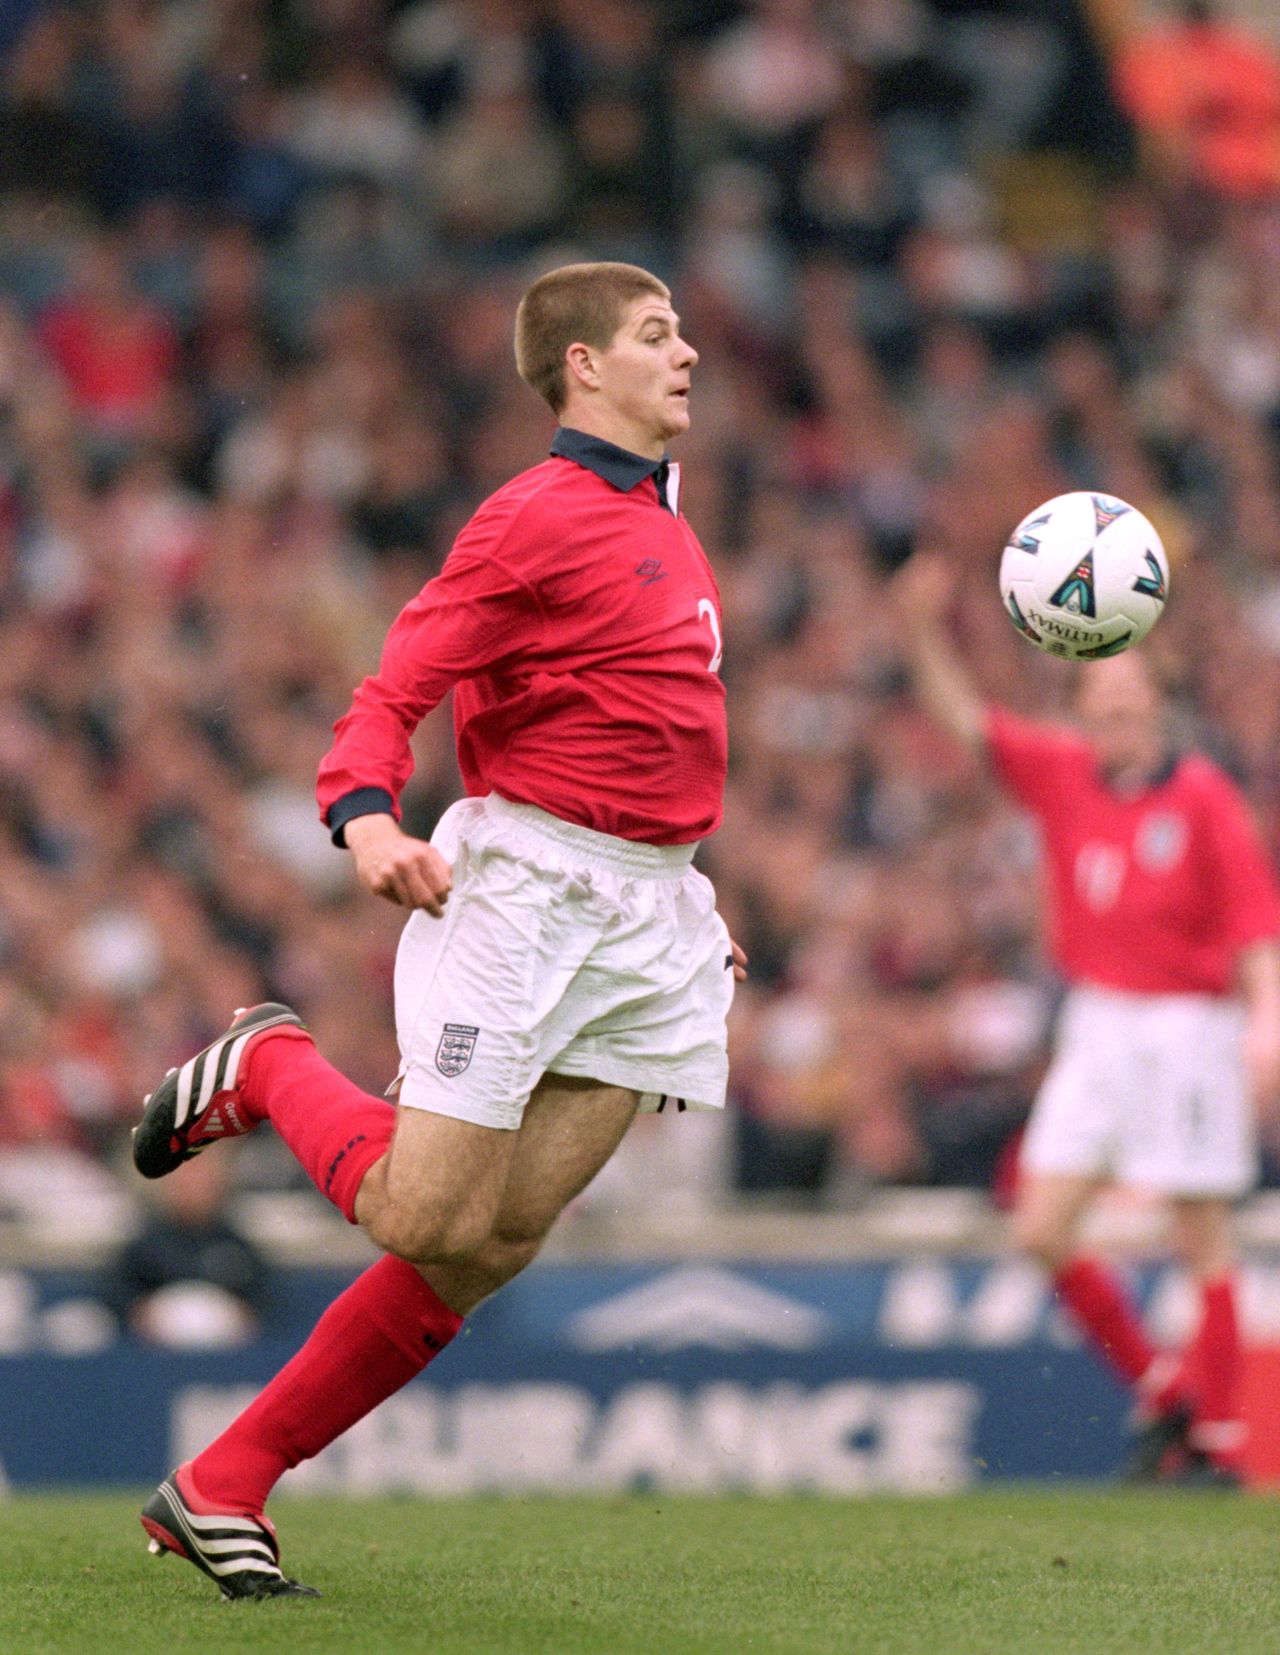 Gerrard made his England debut against Ukraine in 2000, the day after his 20th birthday.